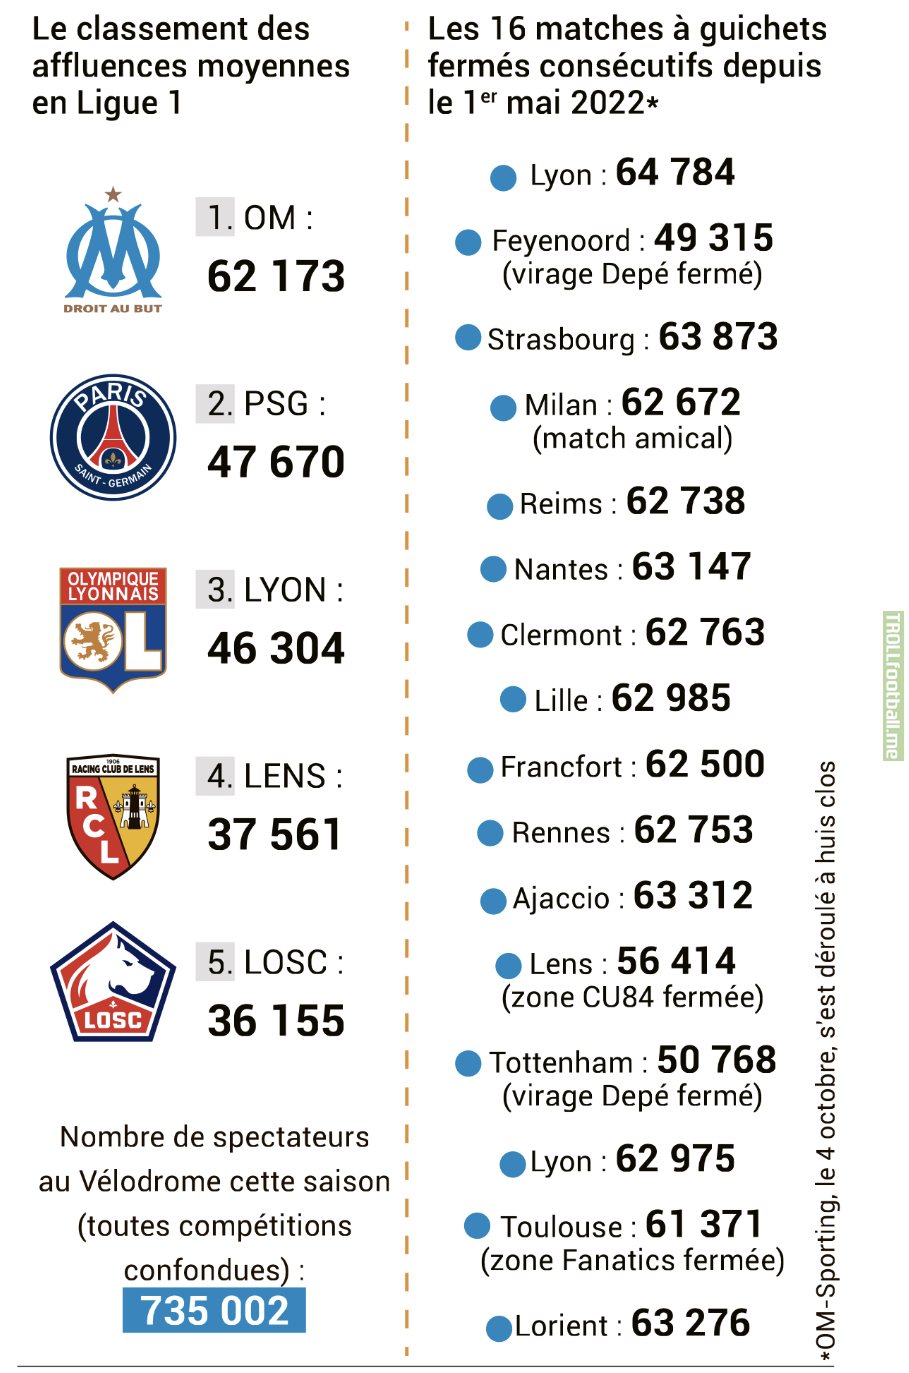 Average home fan attendance in Ligue 1 this season